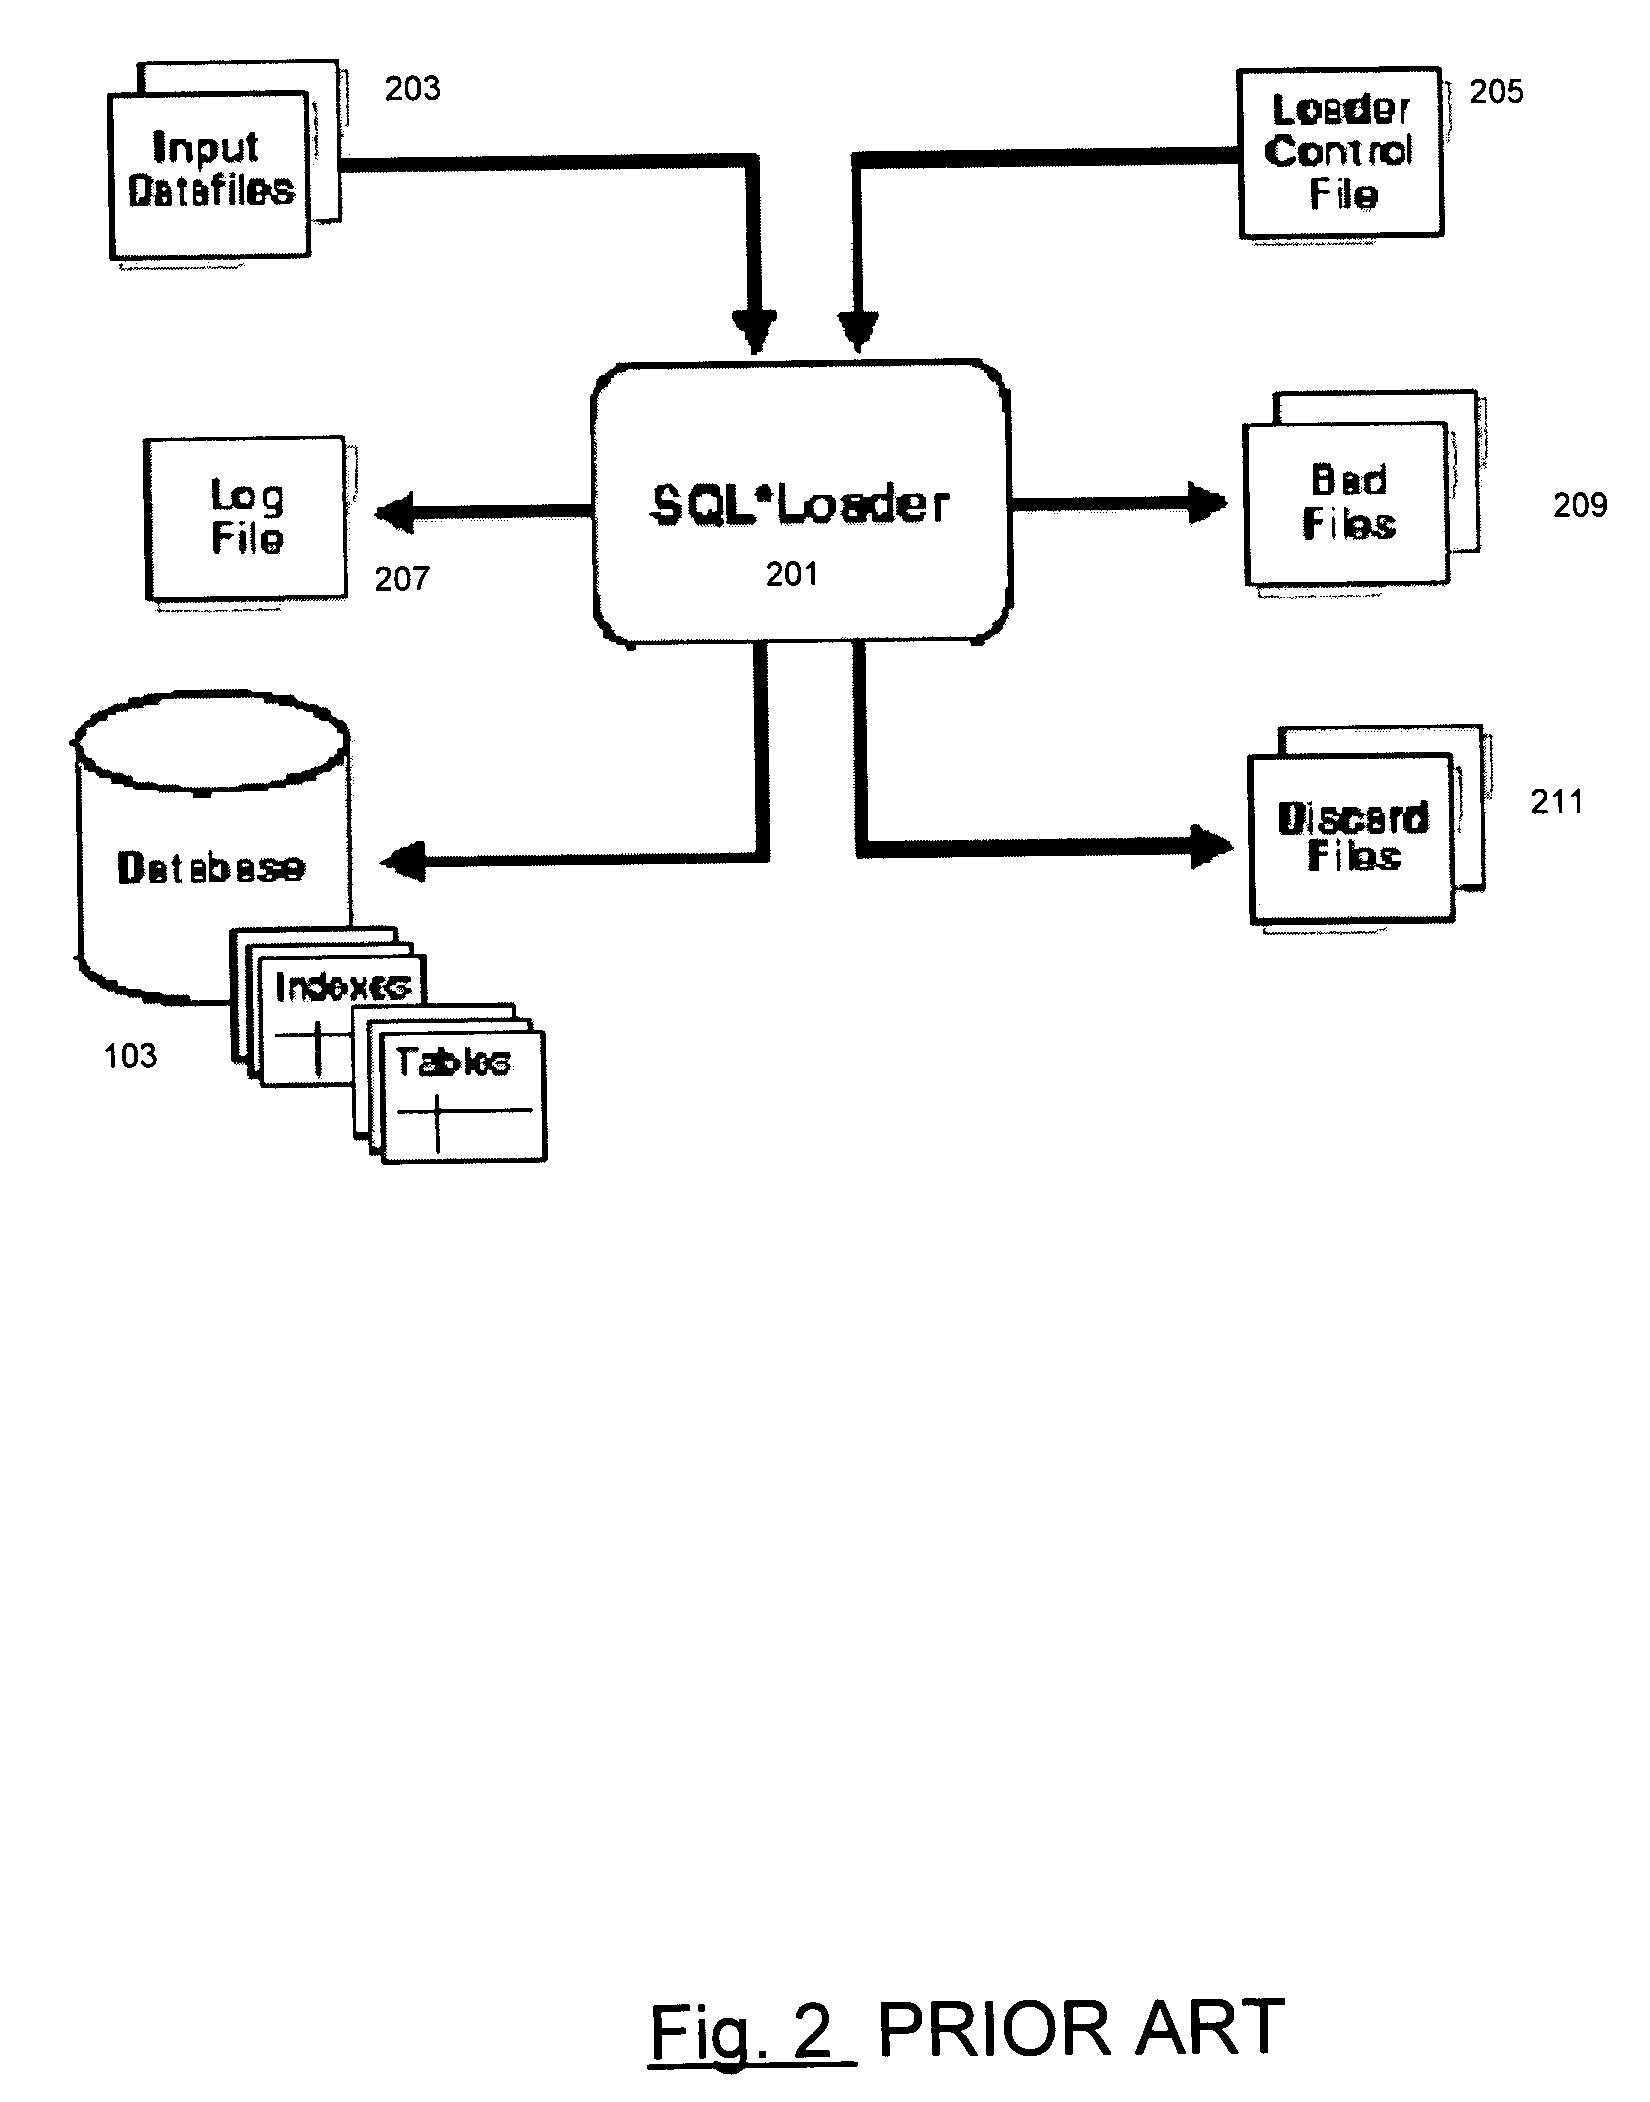 Apparatus and methods for transferring database objects into and out of database systems